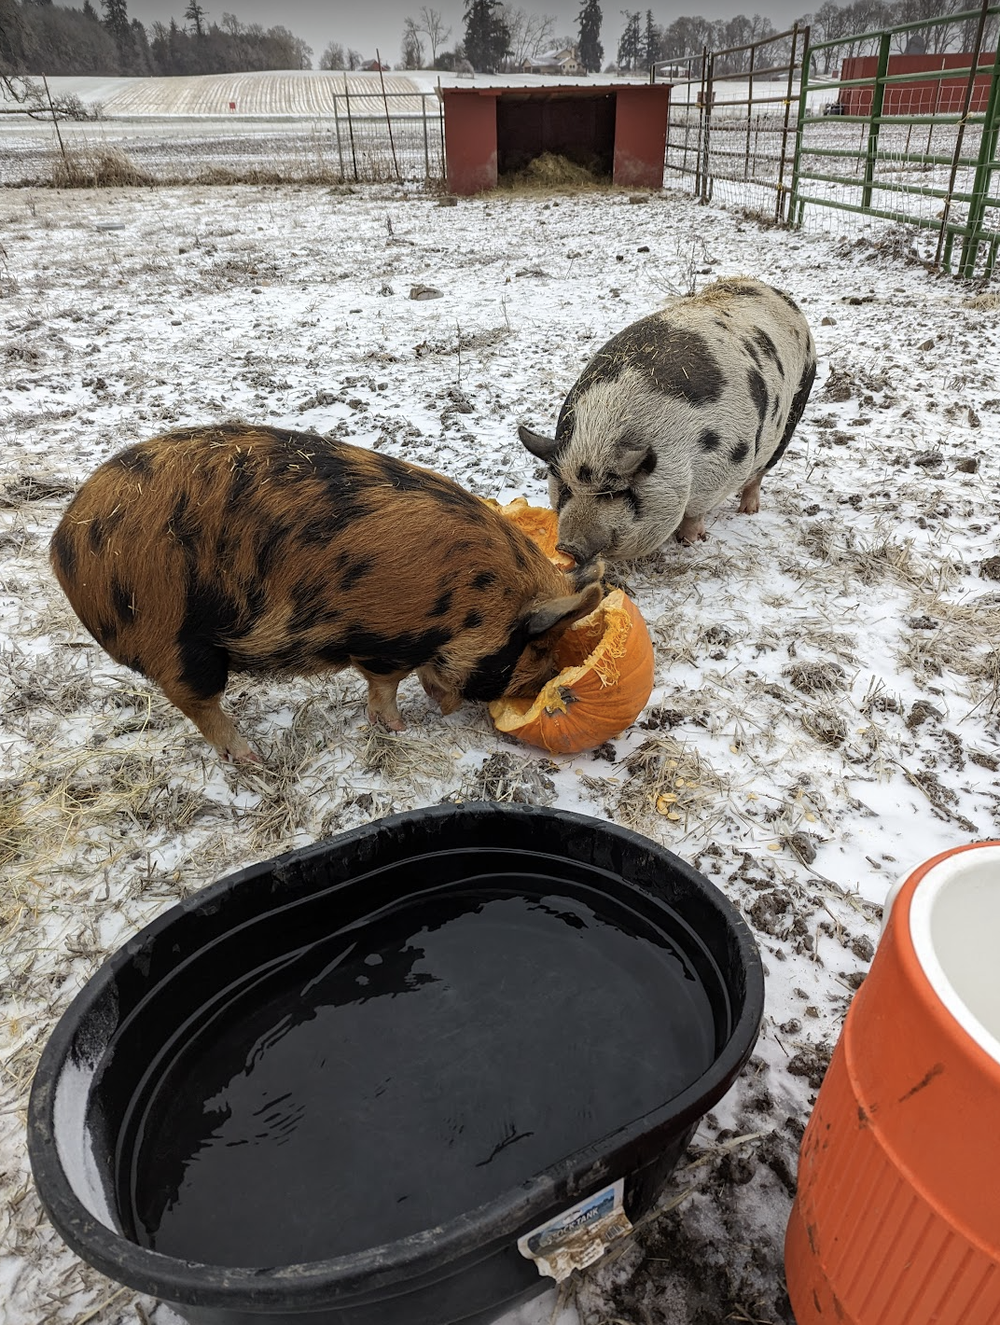 Petunia and Sophie enjoying one of our pumpkins.